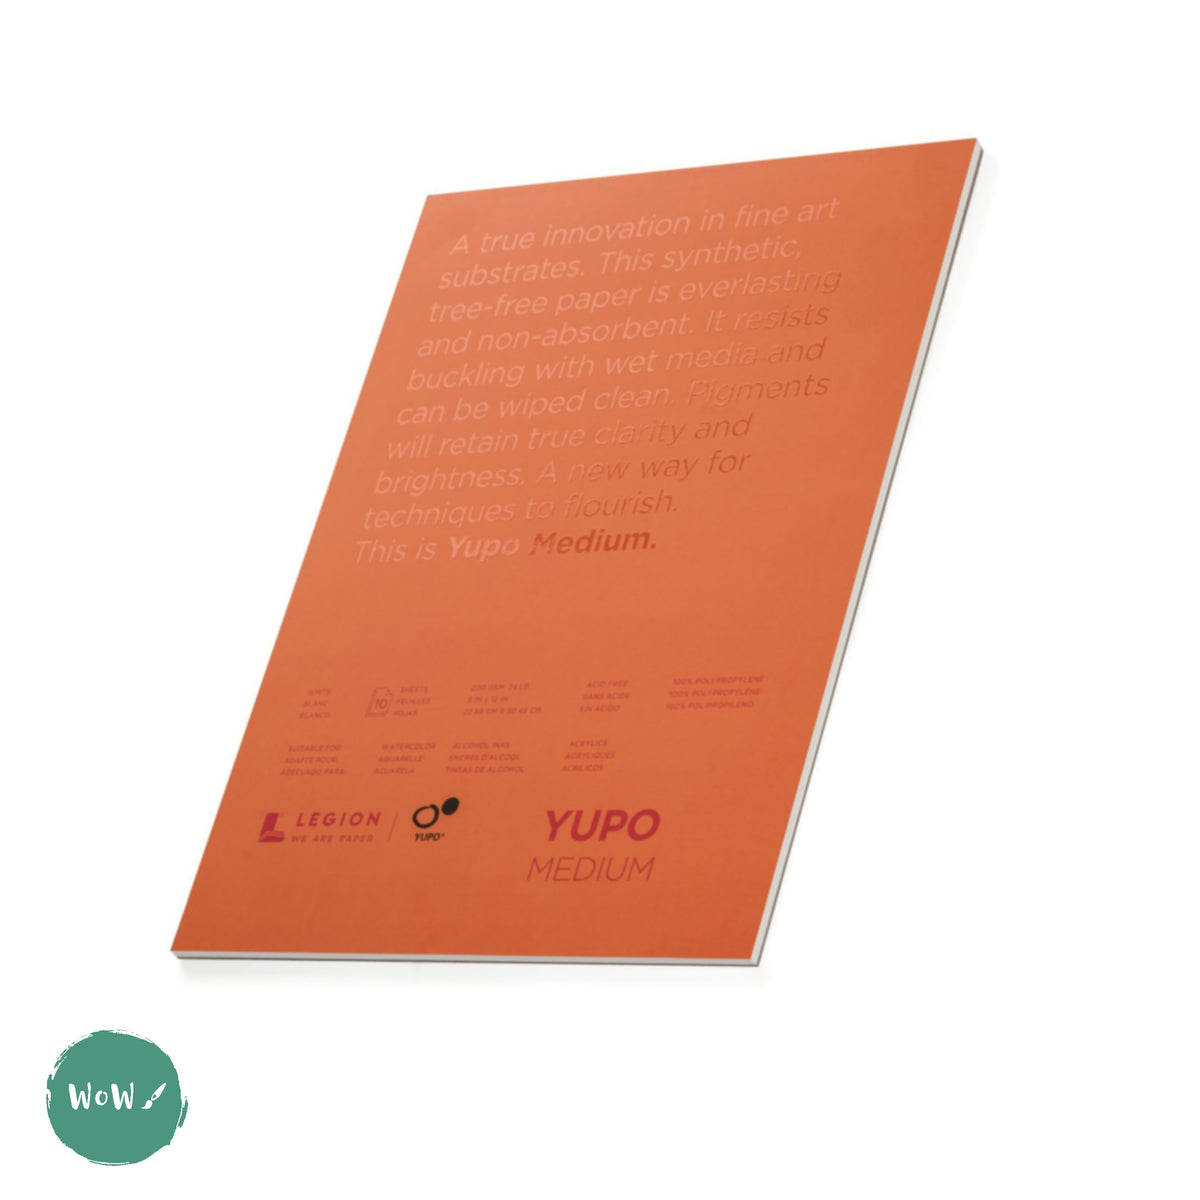 Yupo Paper White (10 sheets per pack) - A4 8.3 x 11.7 inches 